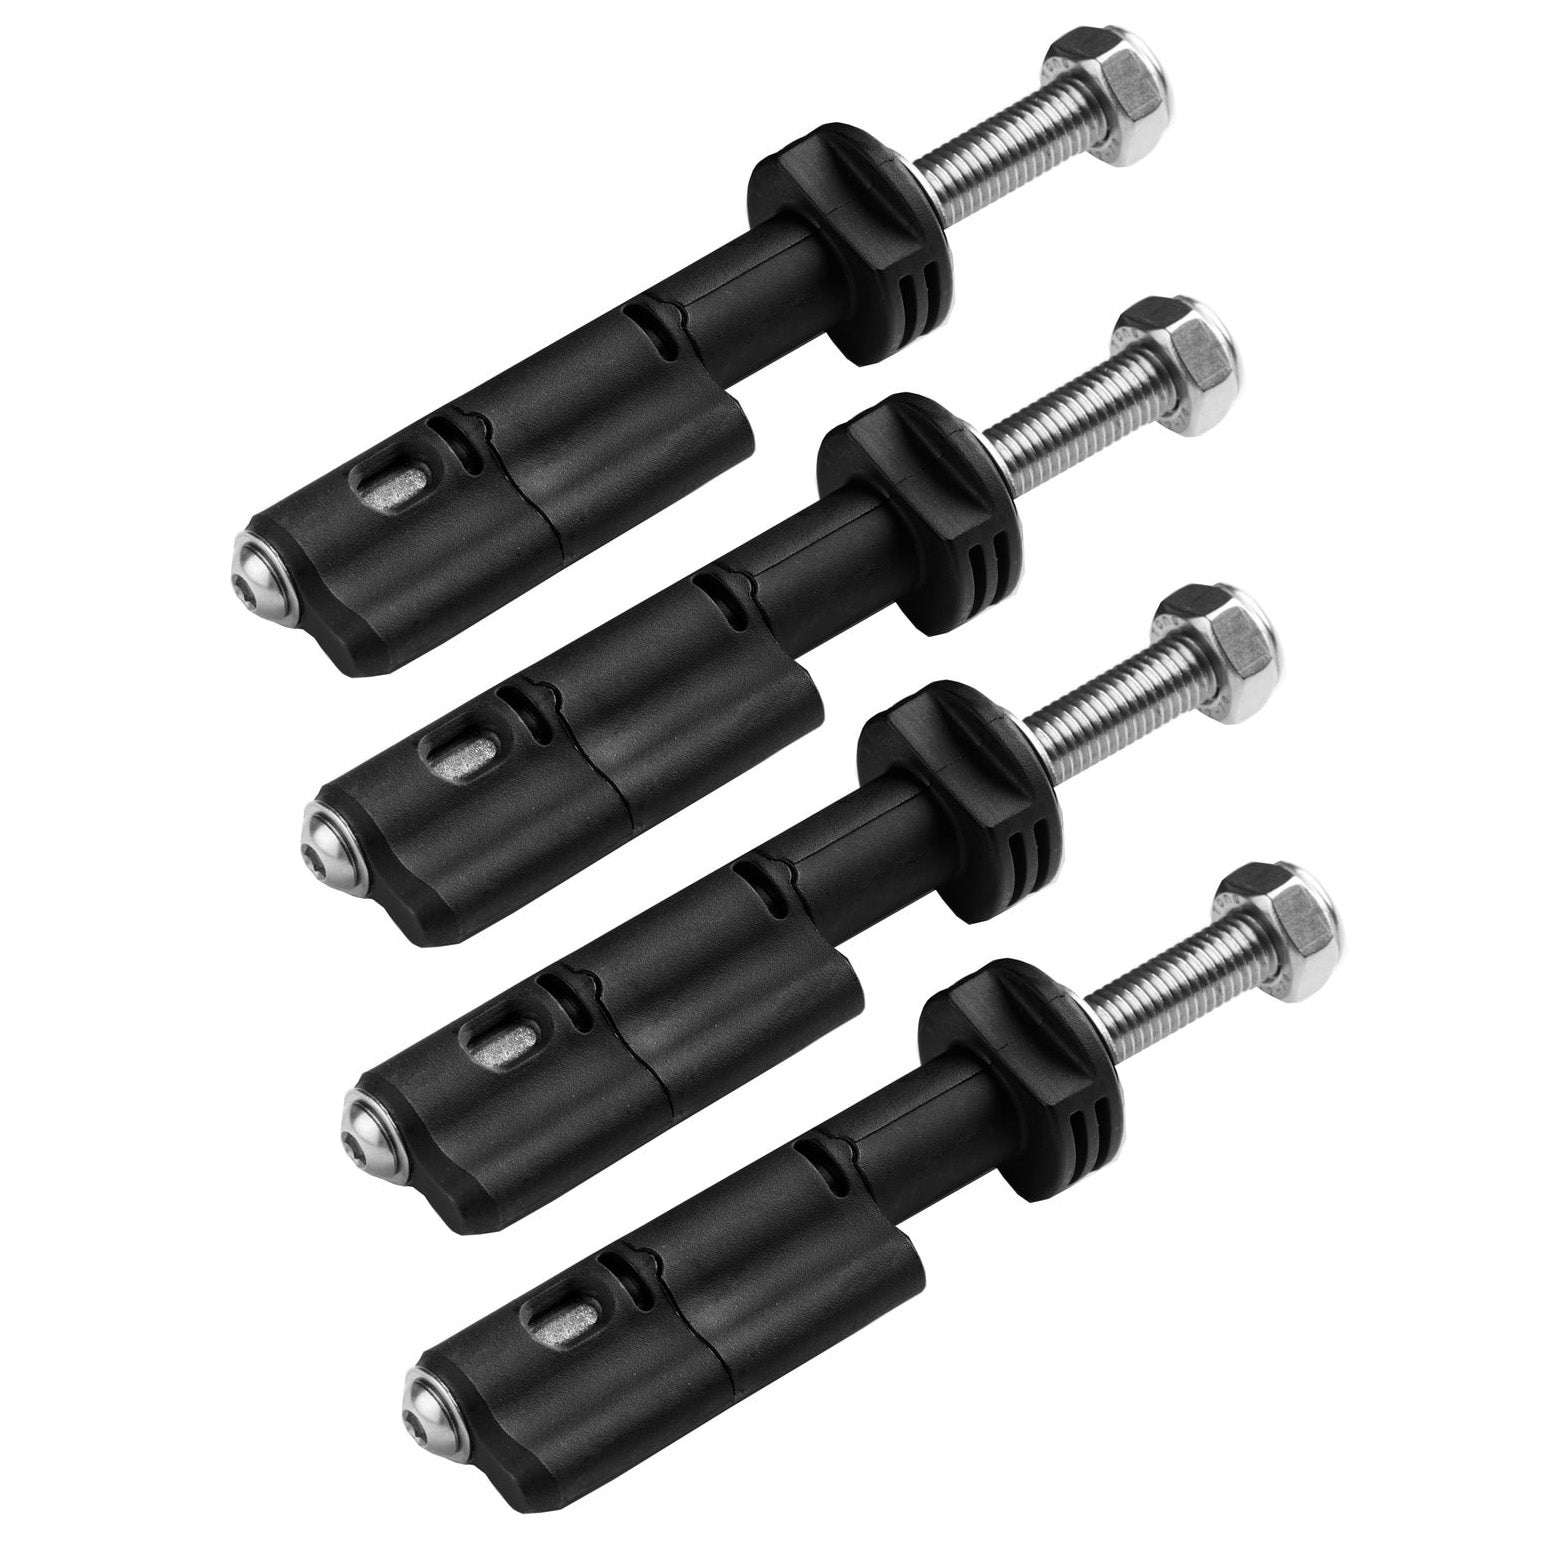 MAXTRAX Mounting Pin Set 40mm - Holds 2 or 4x MKII